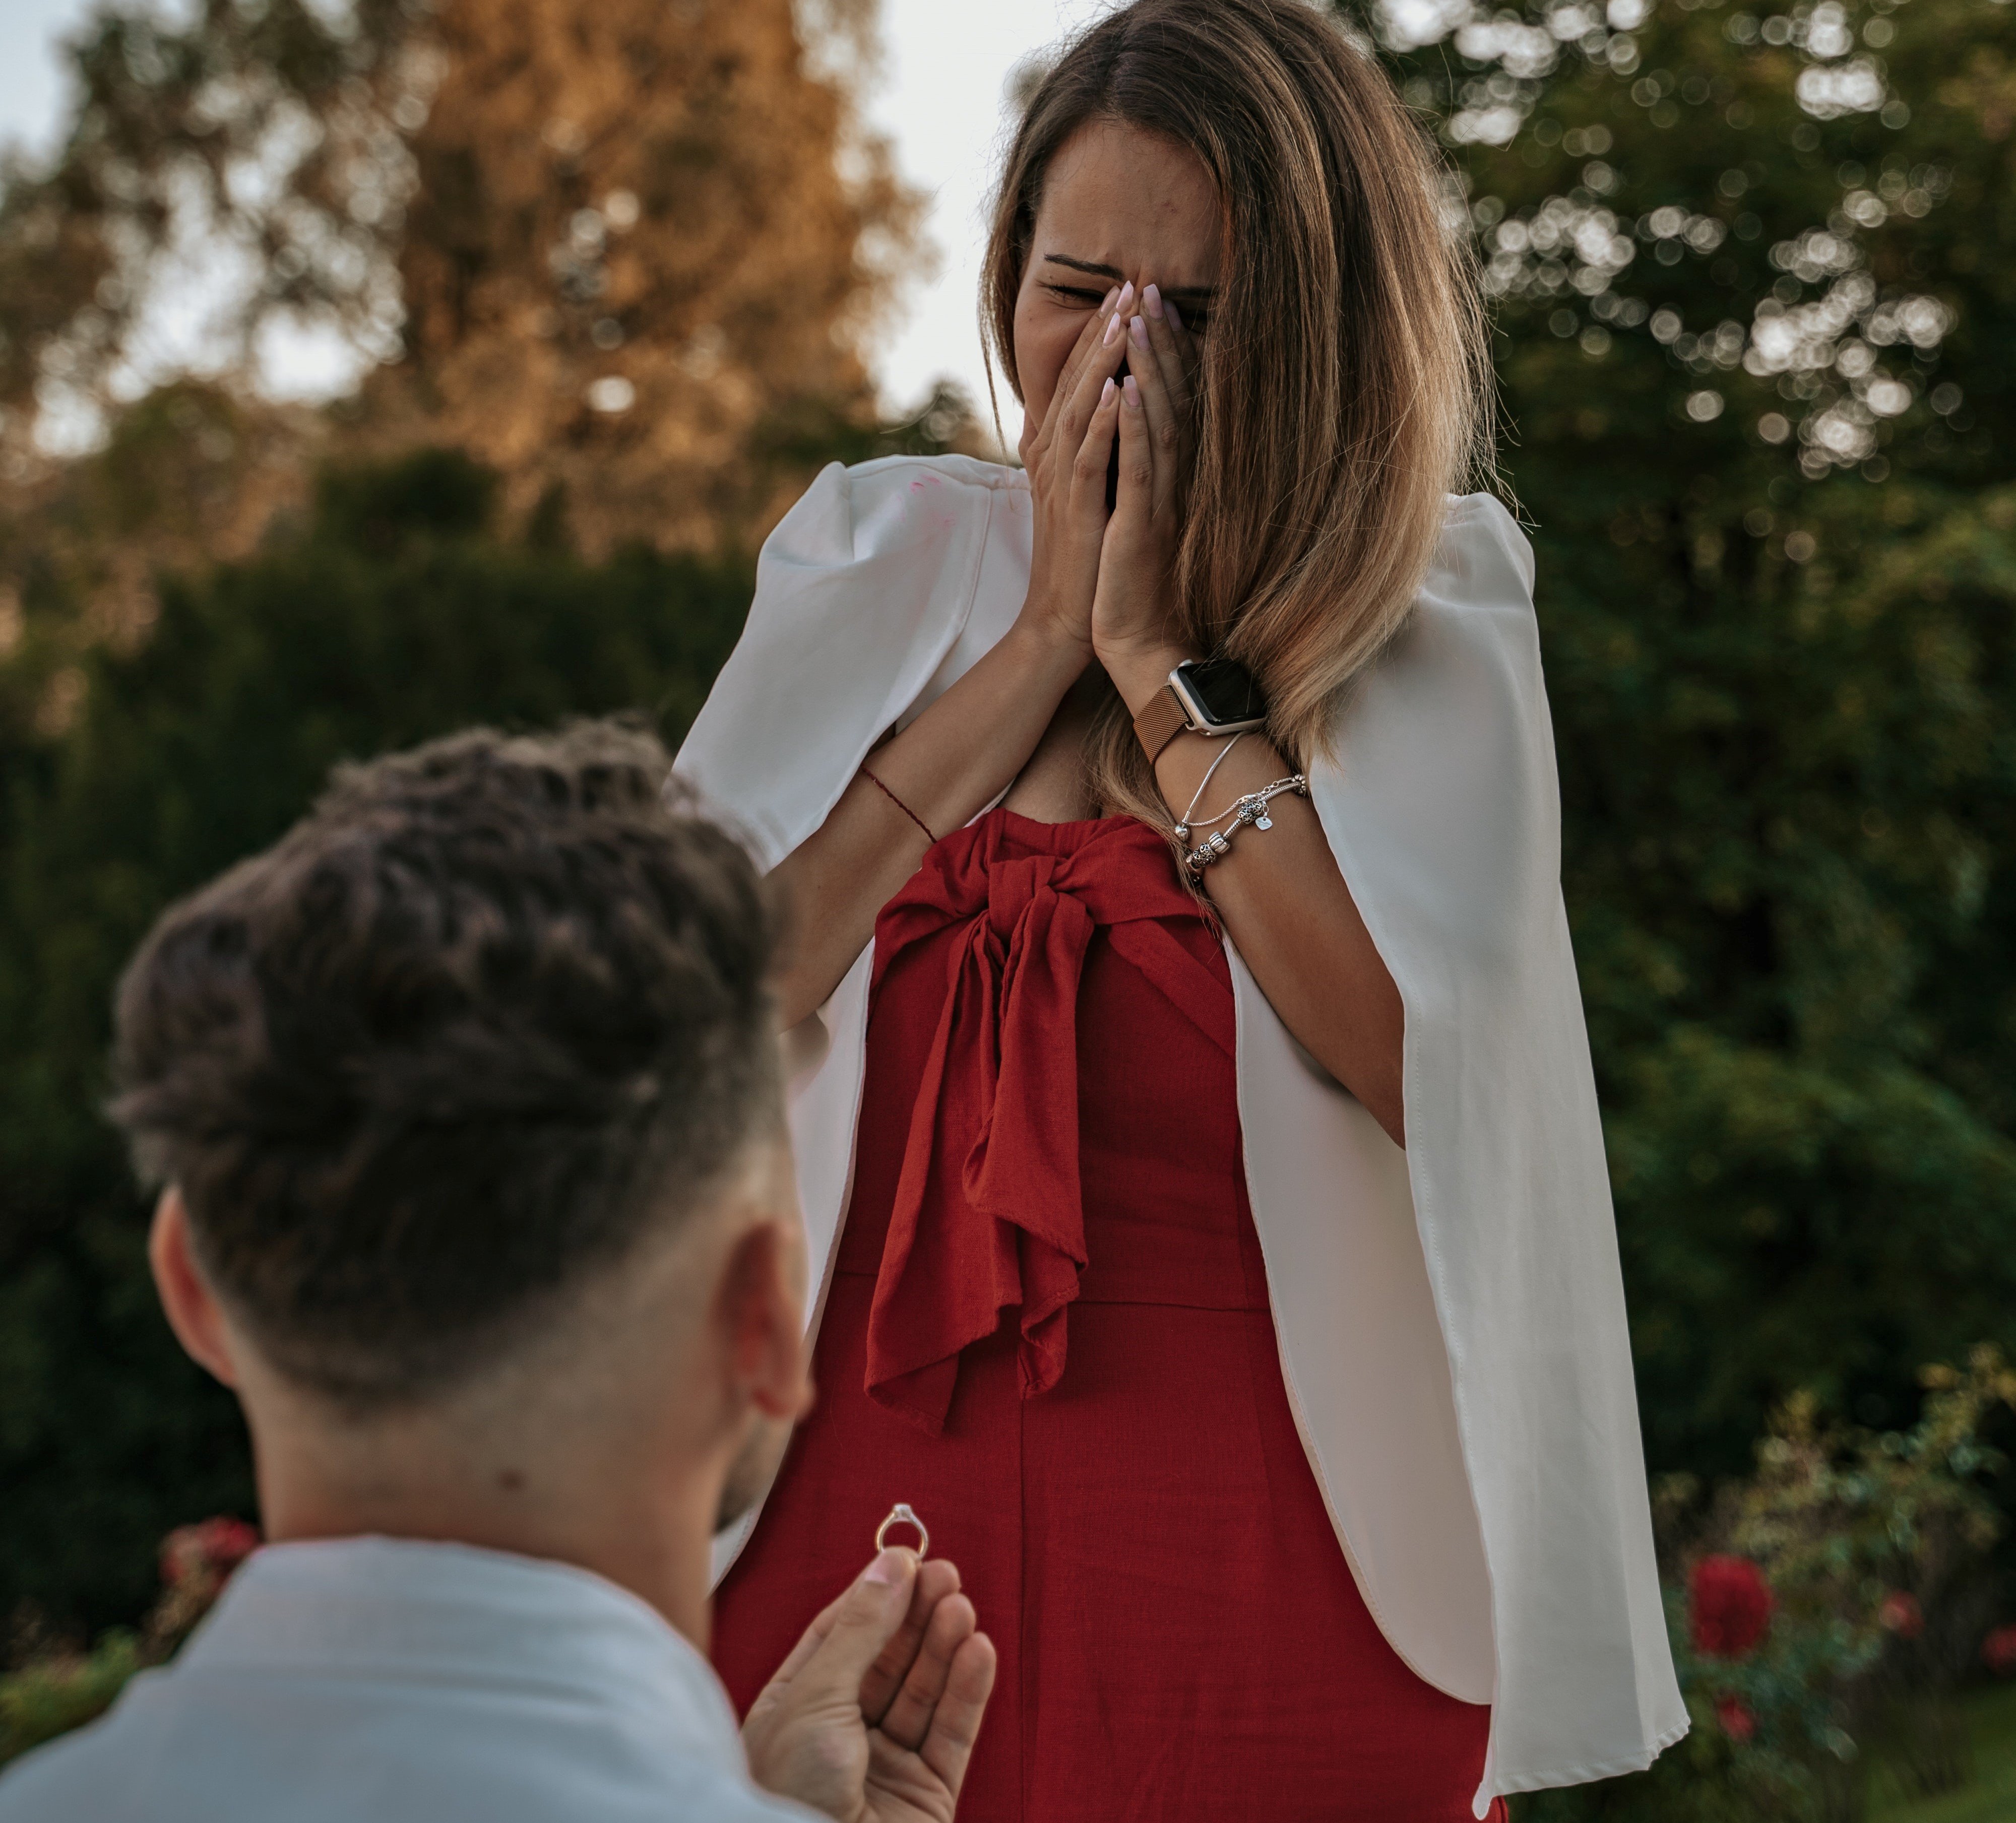 Brittany was elated when Tyler proposed to her. | Source: Unsplash